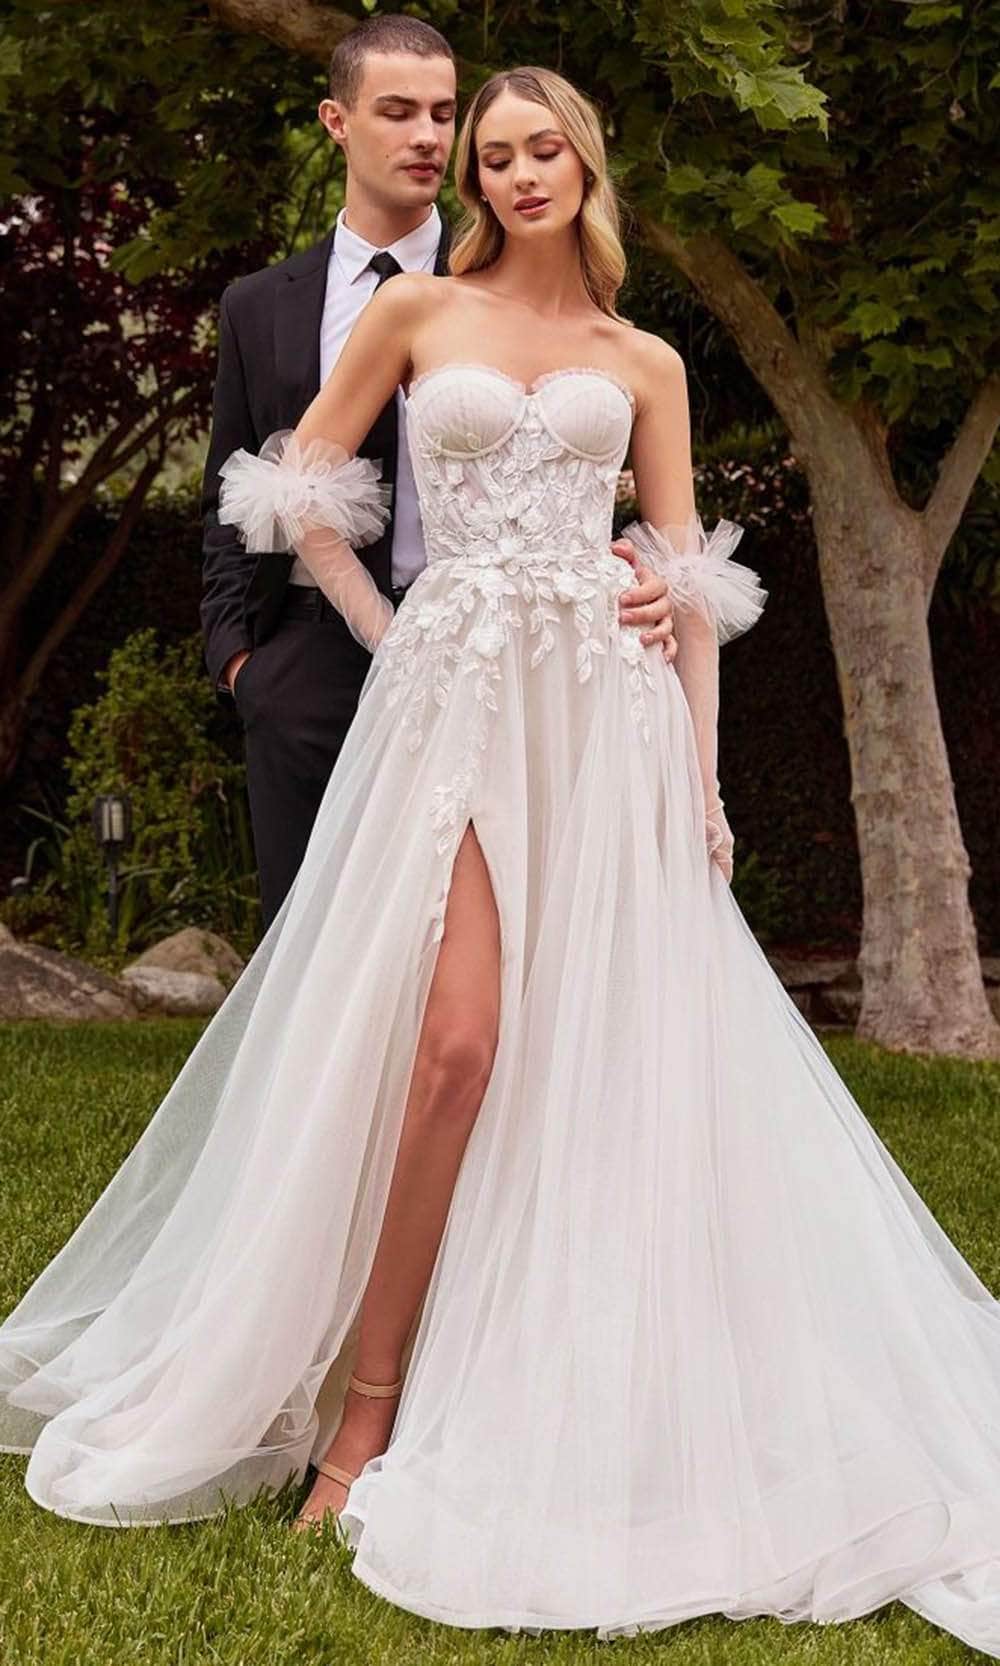 Ladivine CD859W - Tulle Bridal Gown